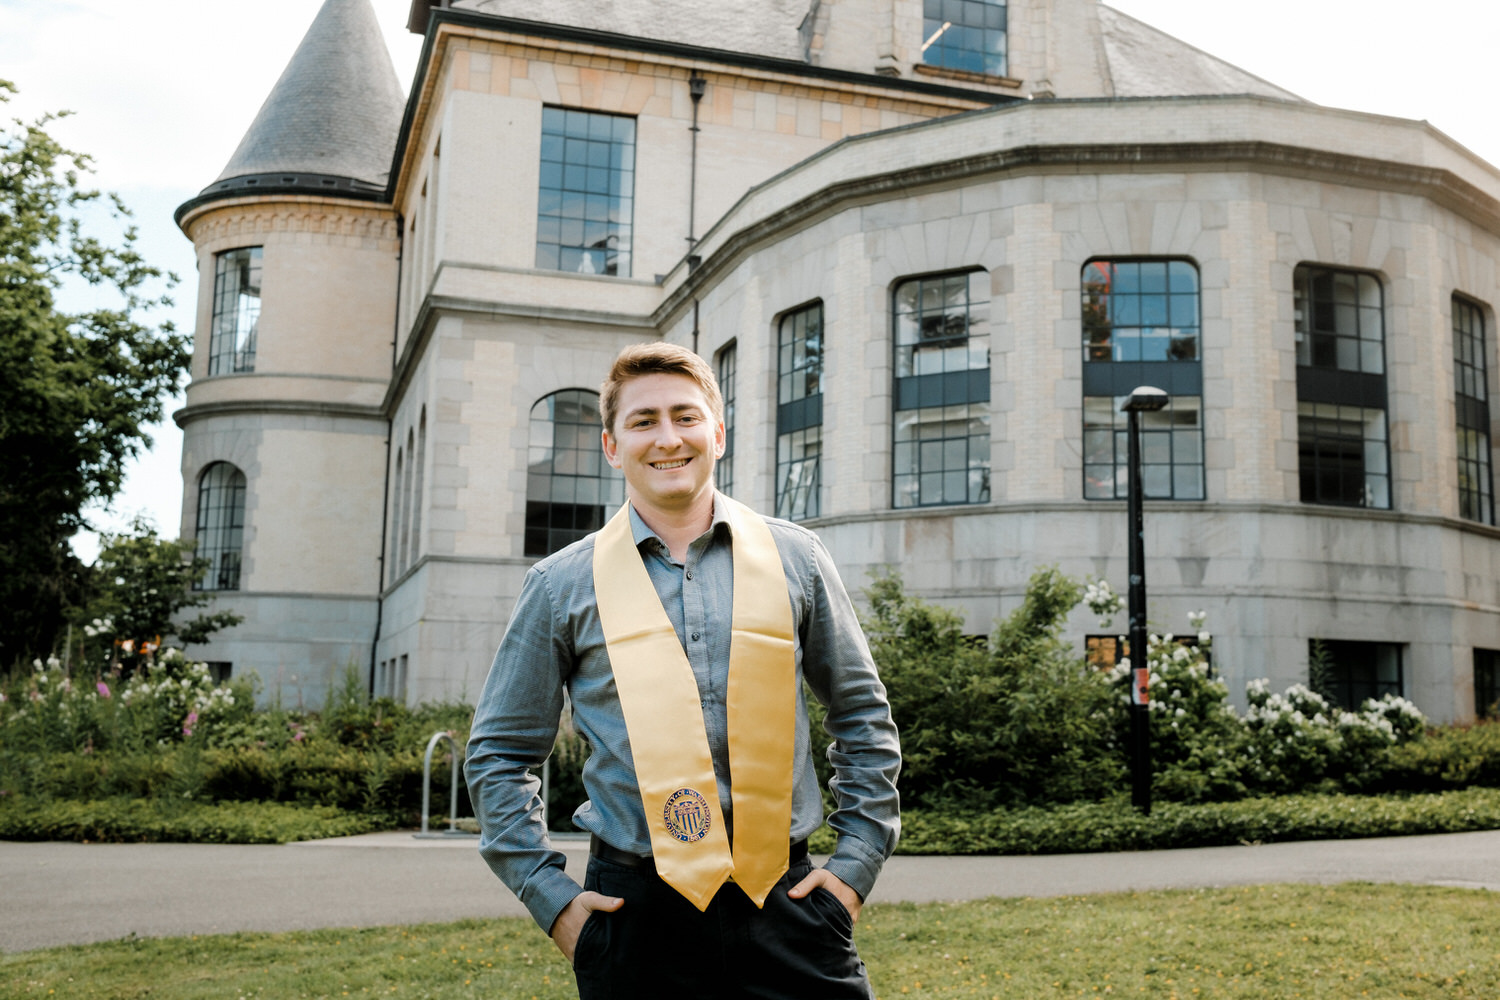 UW graduate posing in front of business school with is yellow sash on